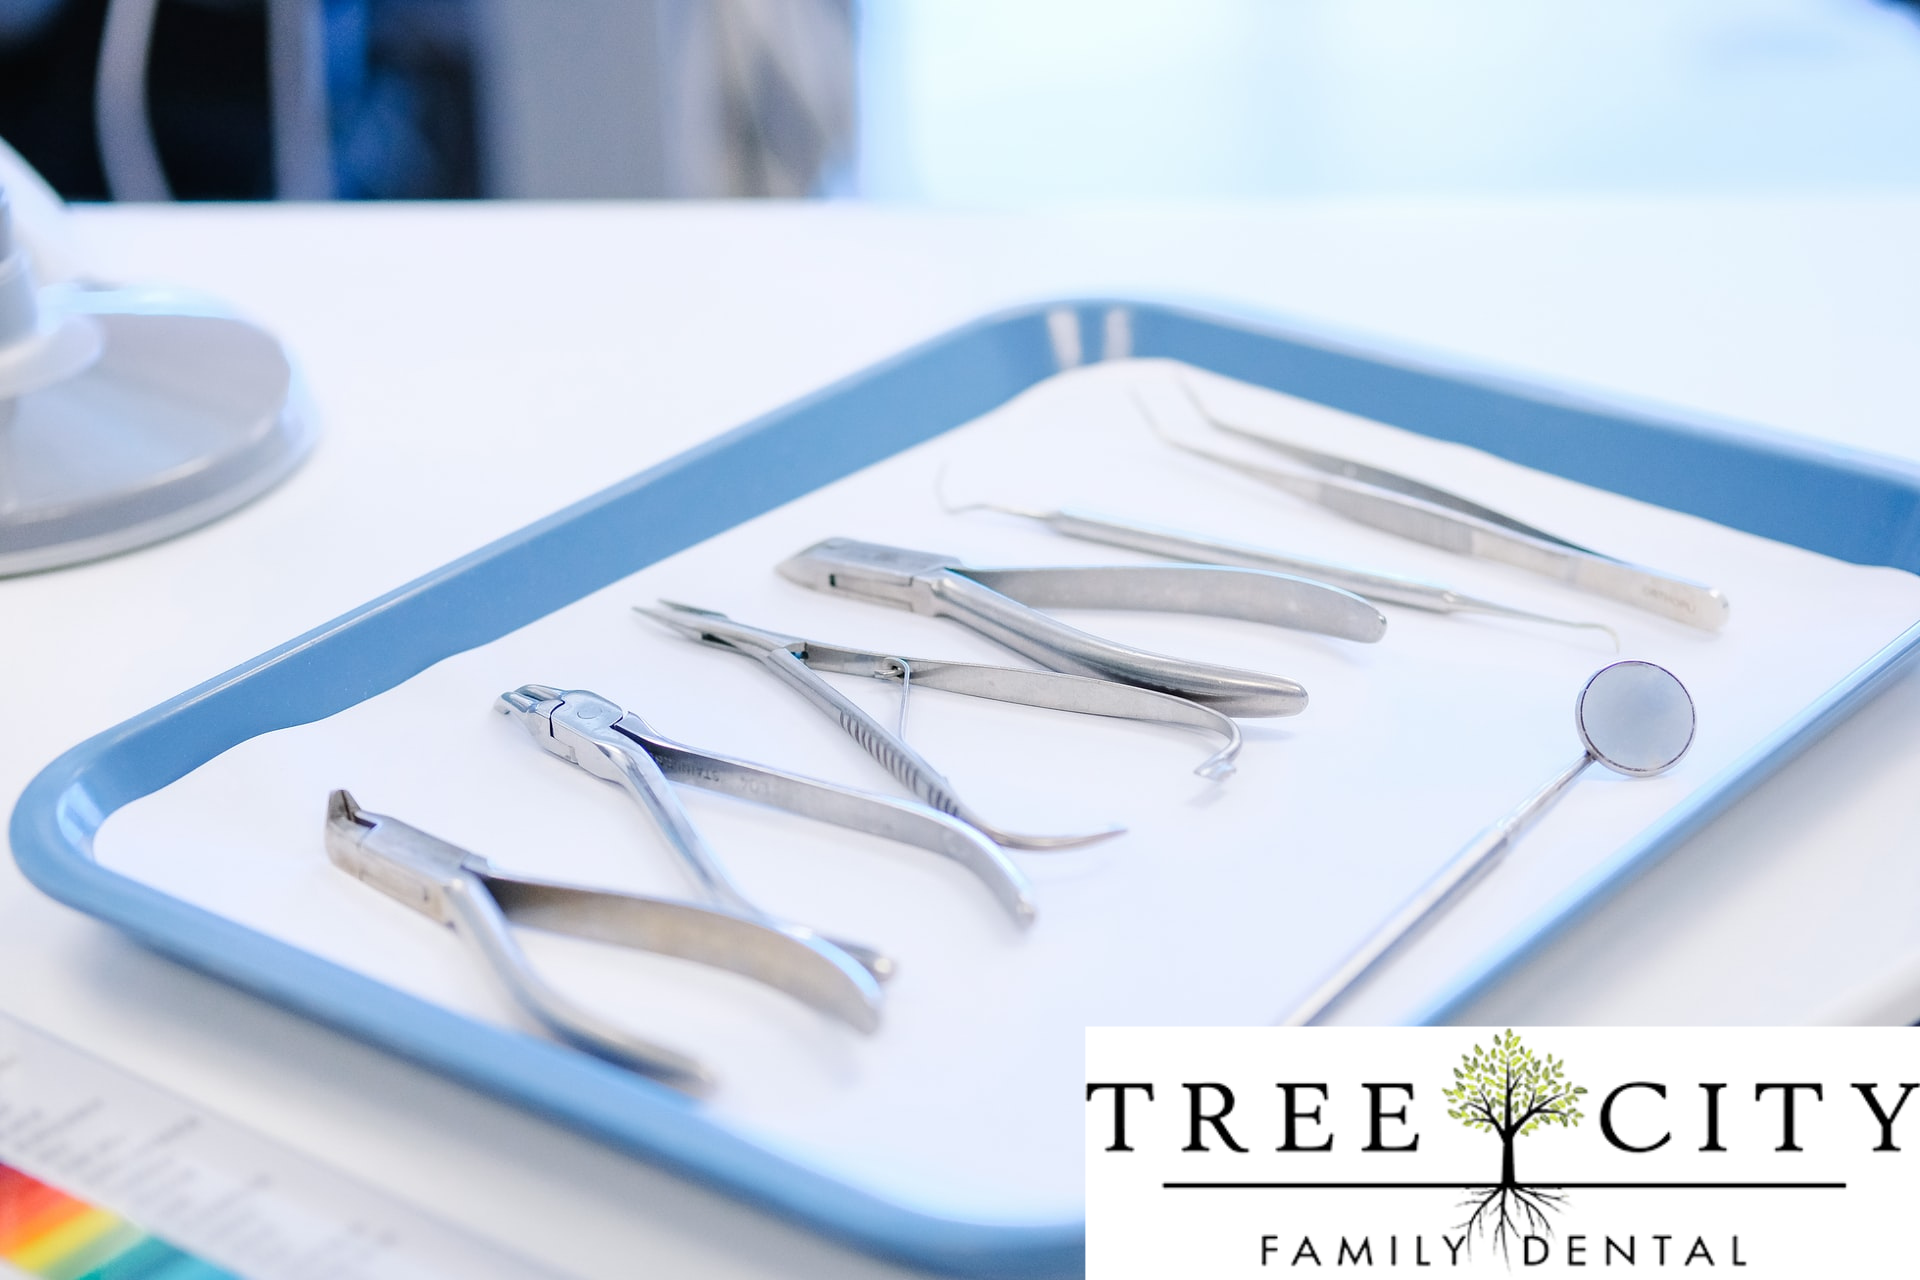 A blue tray carrying various dental instruments.